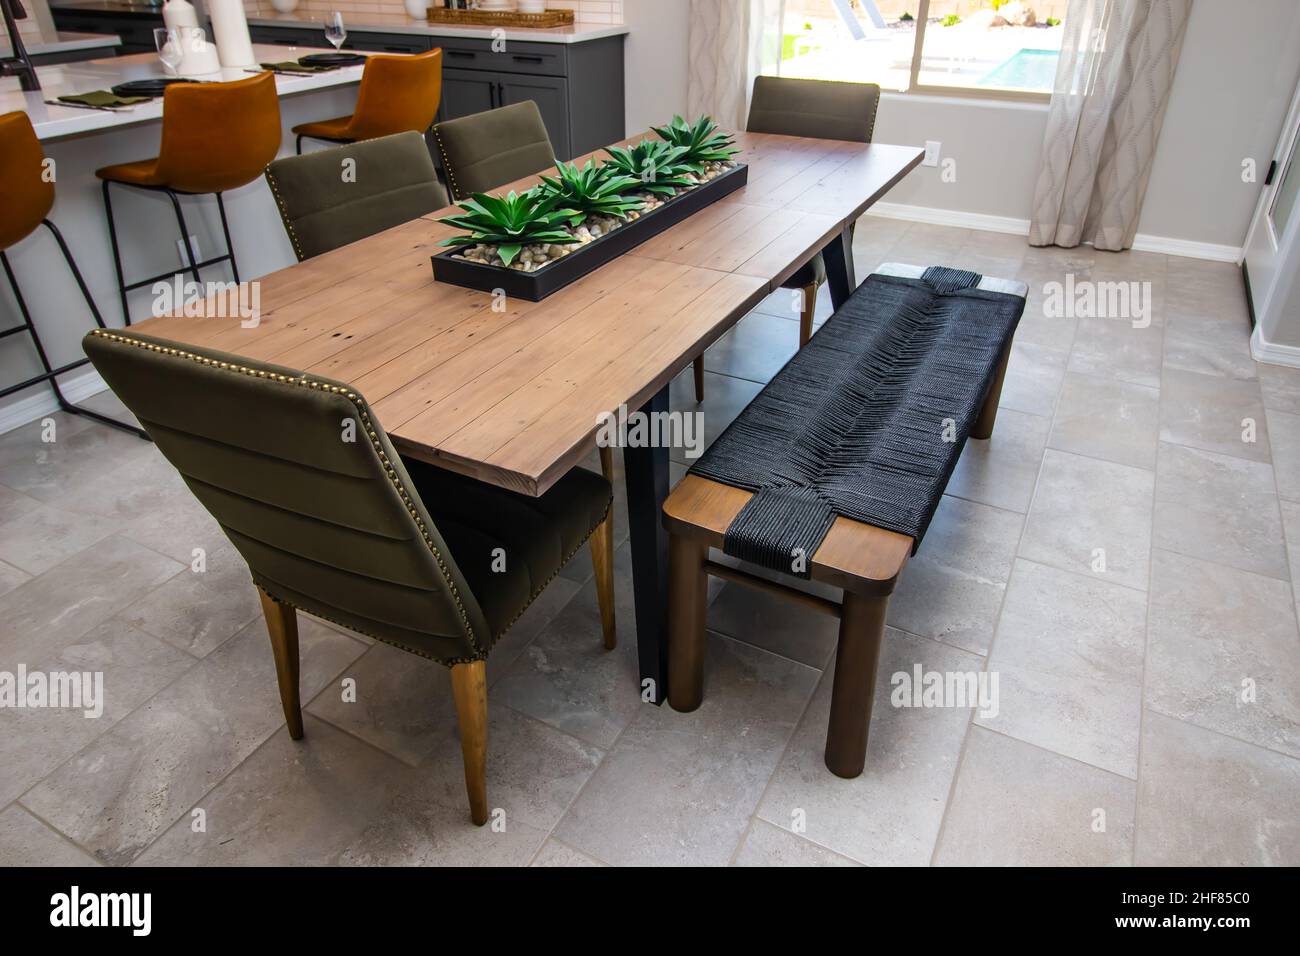 Dining Area Oblong Wooden Table With Centerpiece, High Back Chairs And Sitting Bench Stock Photo